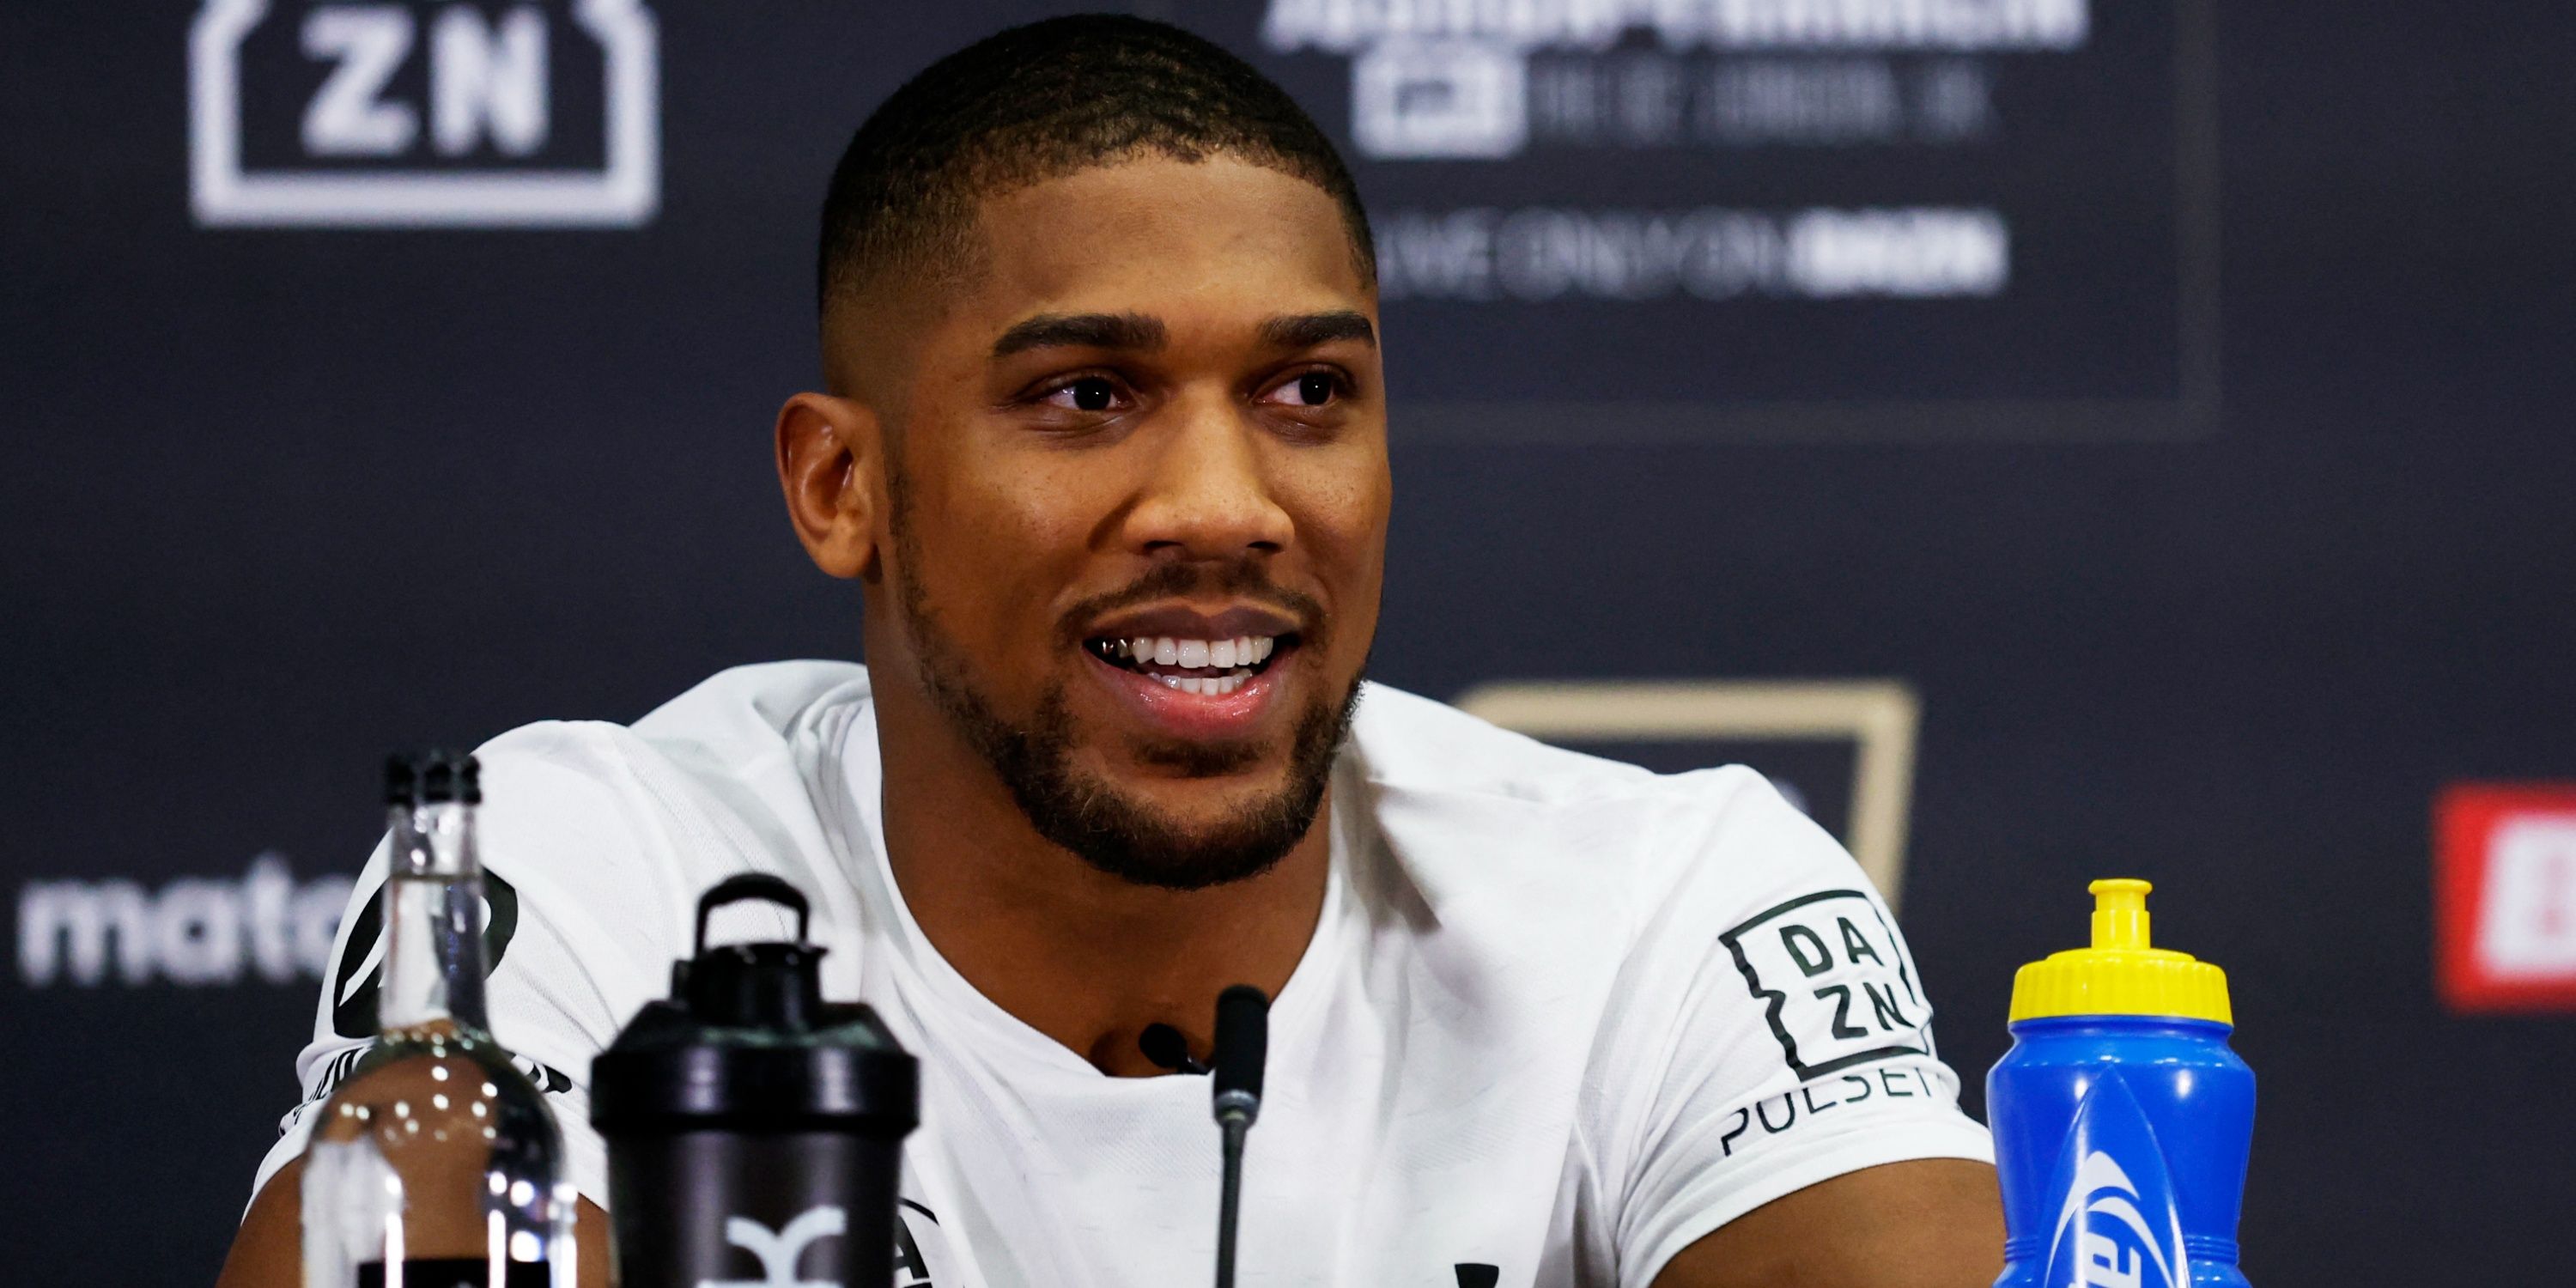 Anthony Joshua fields questions from the media